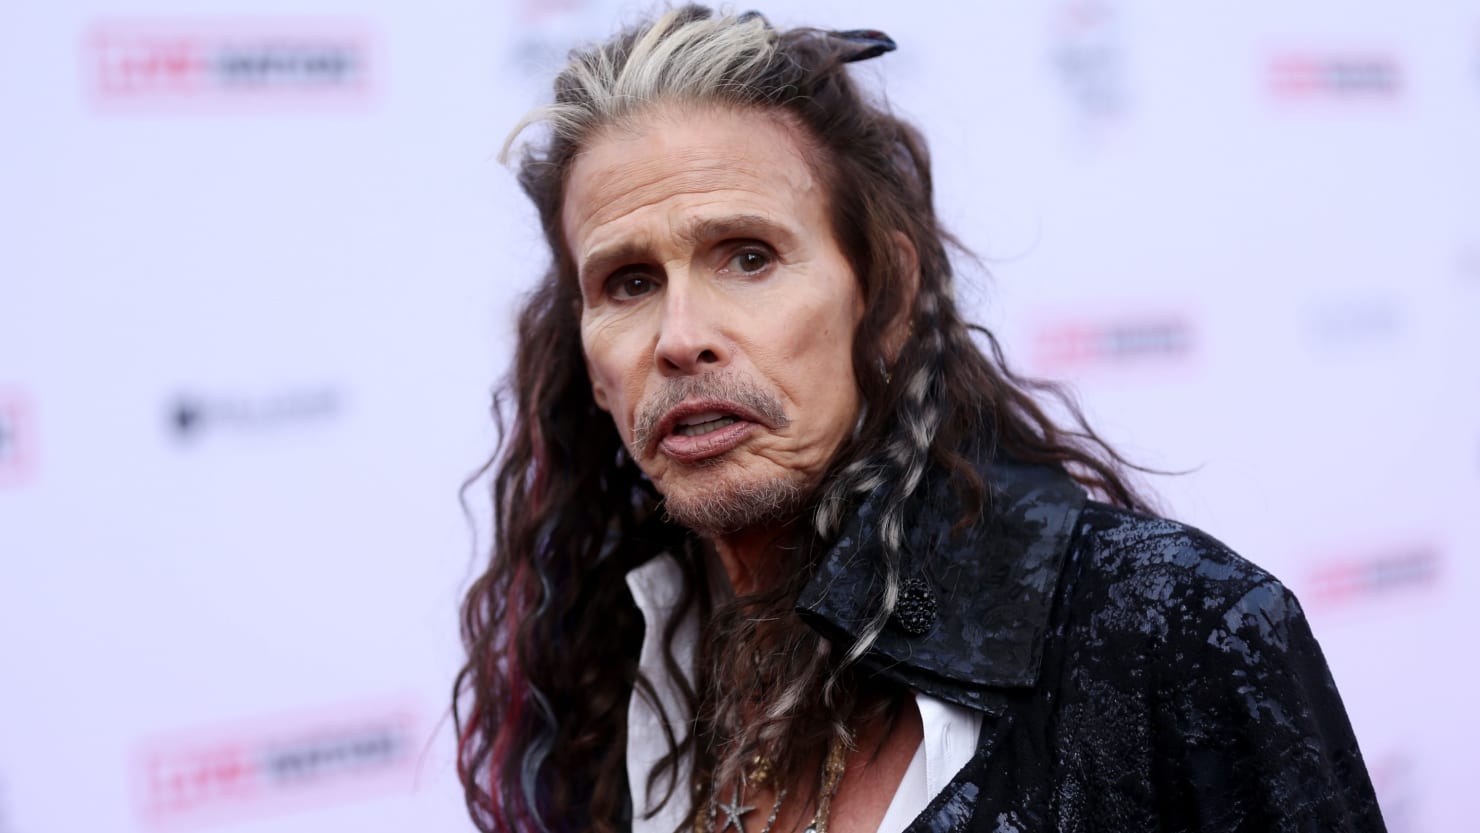 New Lawsuit: Steven Tyler Sued For Alleged 1975 Sexual Assault